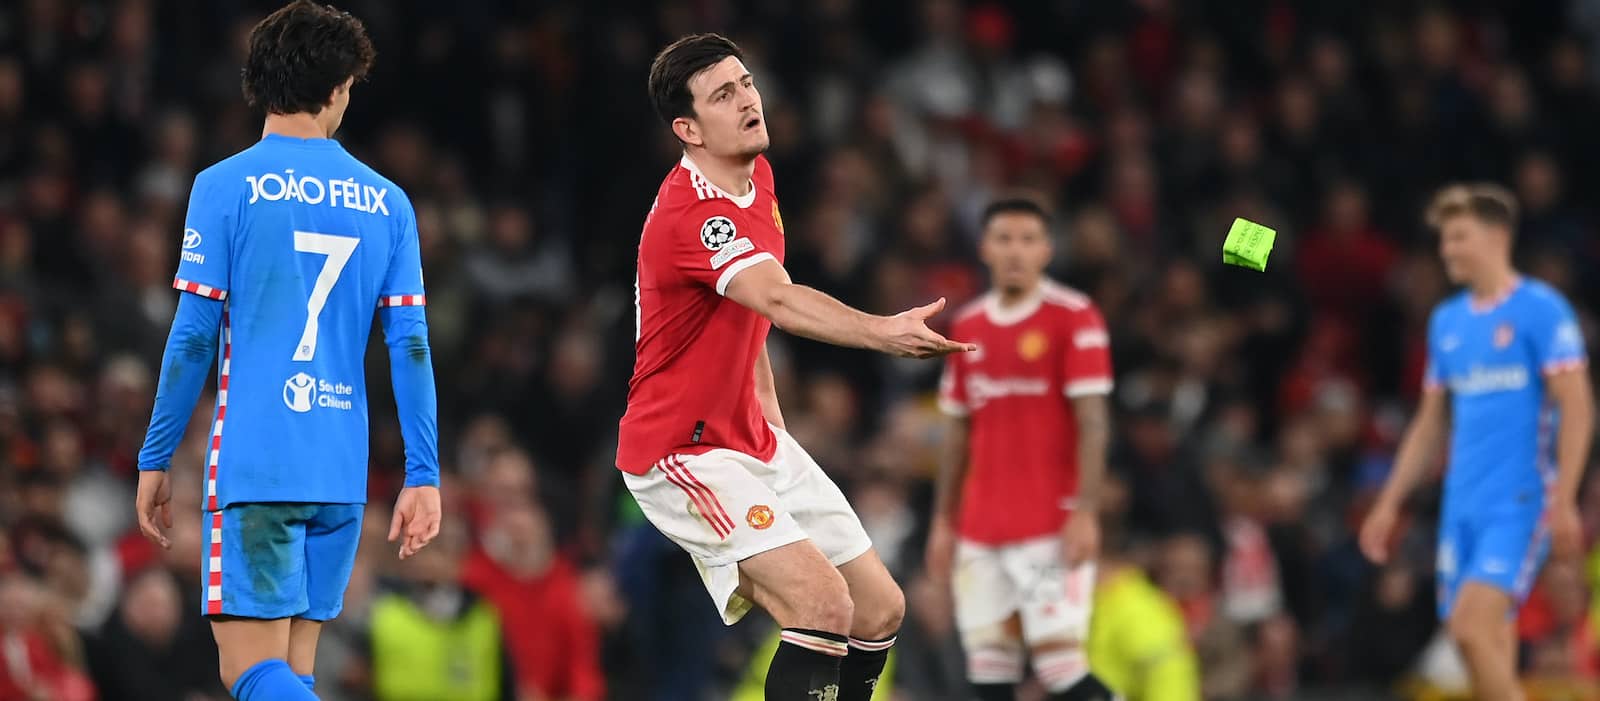                Harry Maguire was urged to give up captaincy as Manchester United